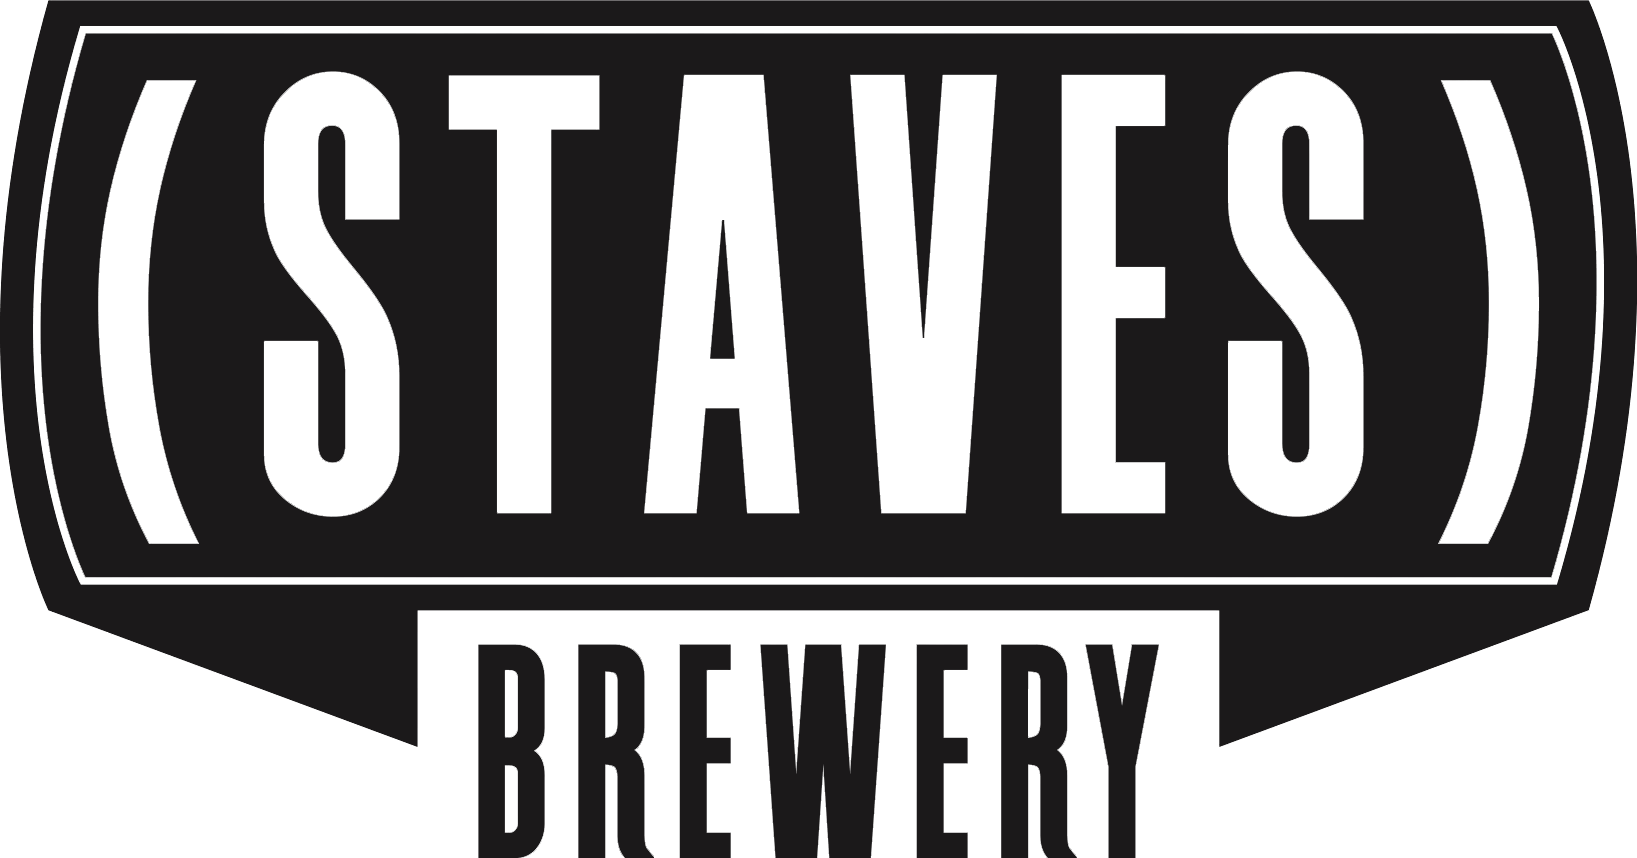 Staves Brewery